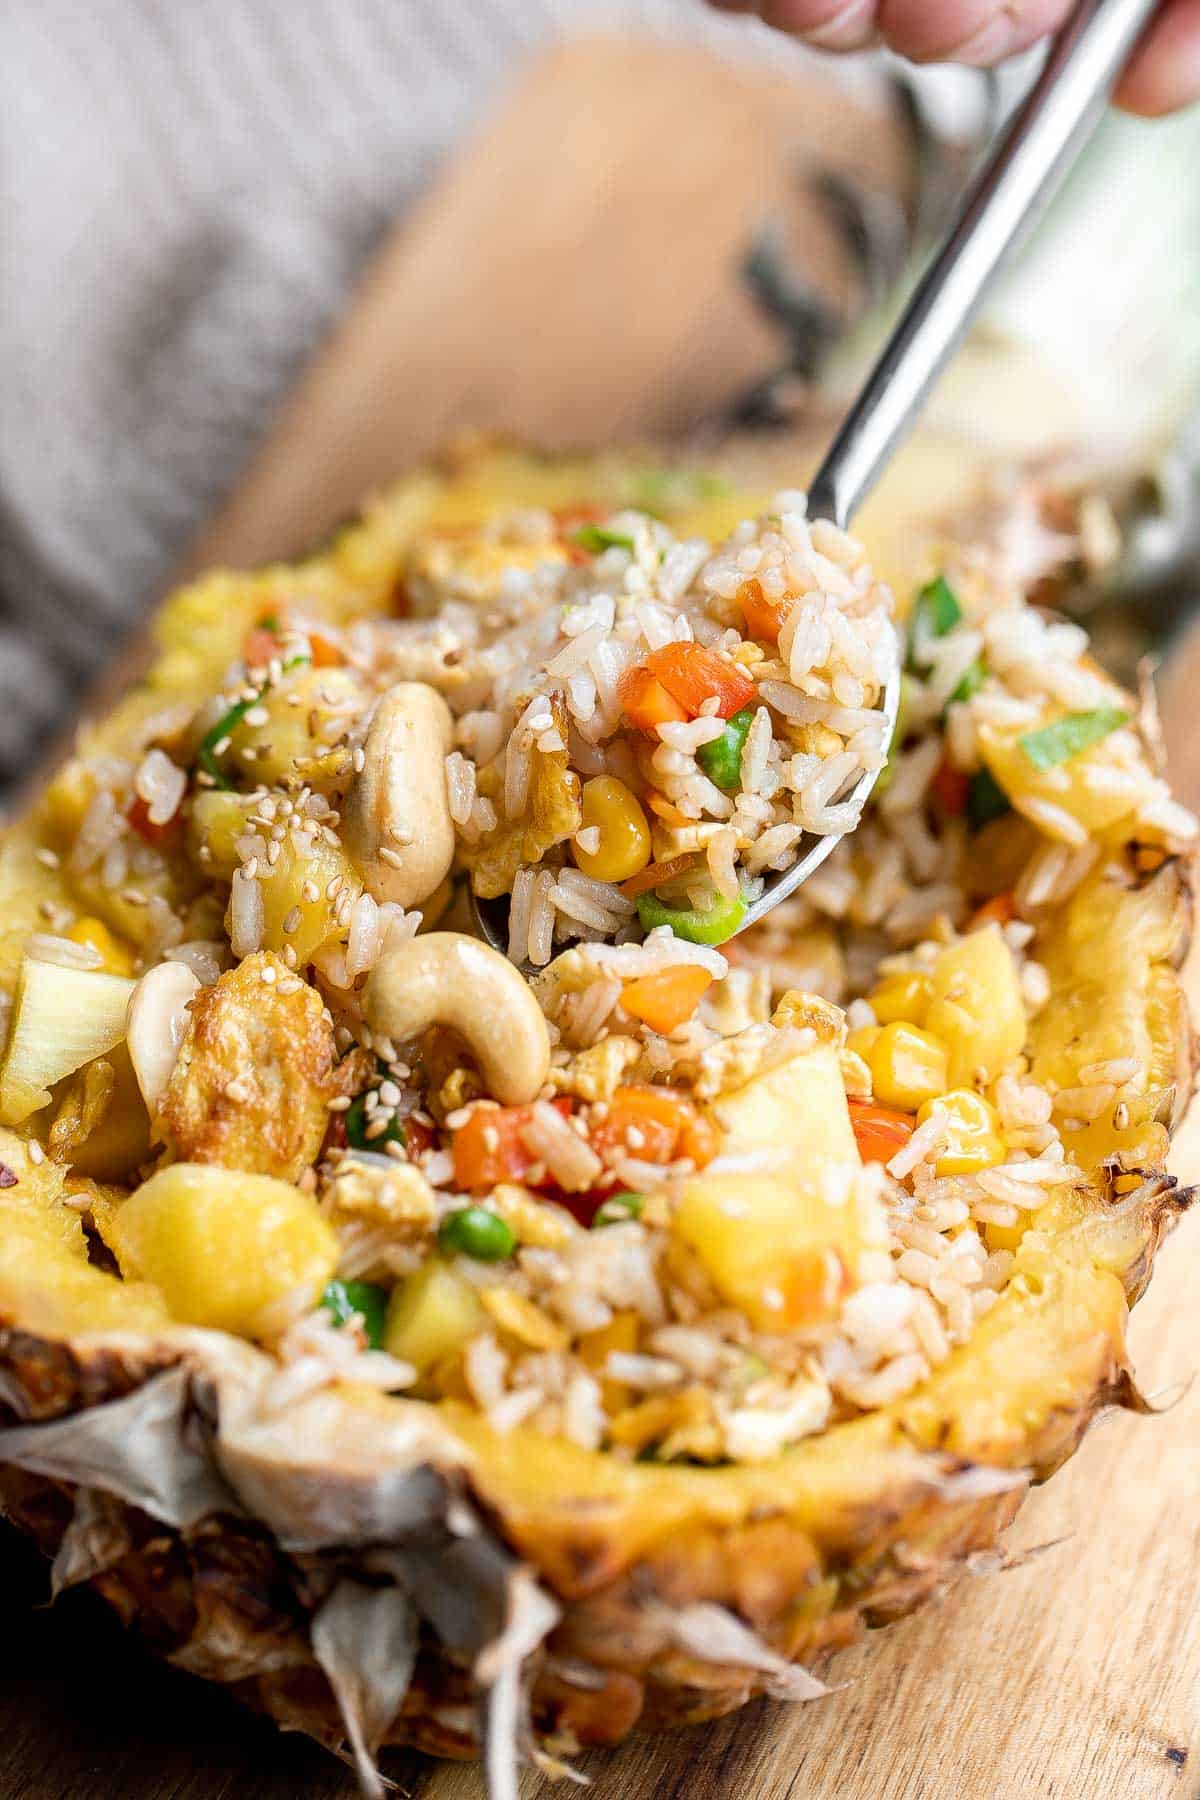 Pineapple fried rice is a quick and easy meal that is ready in just 20 minutes. It's a savory, sweet, delicious, and flavorful weeknight family dinner. | aheadofthyme.com